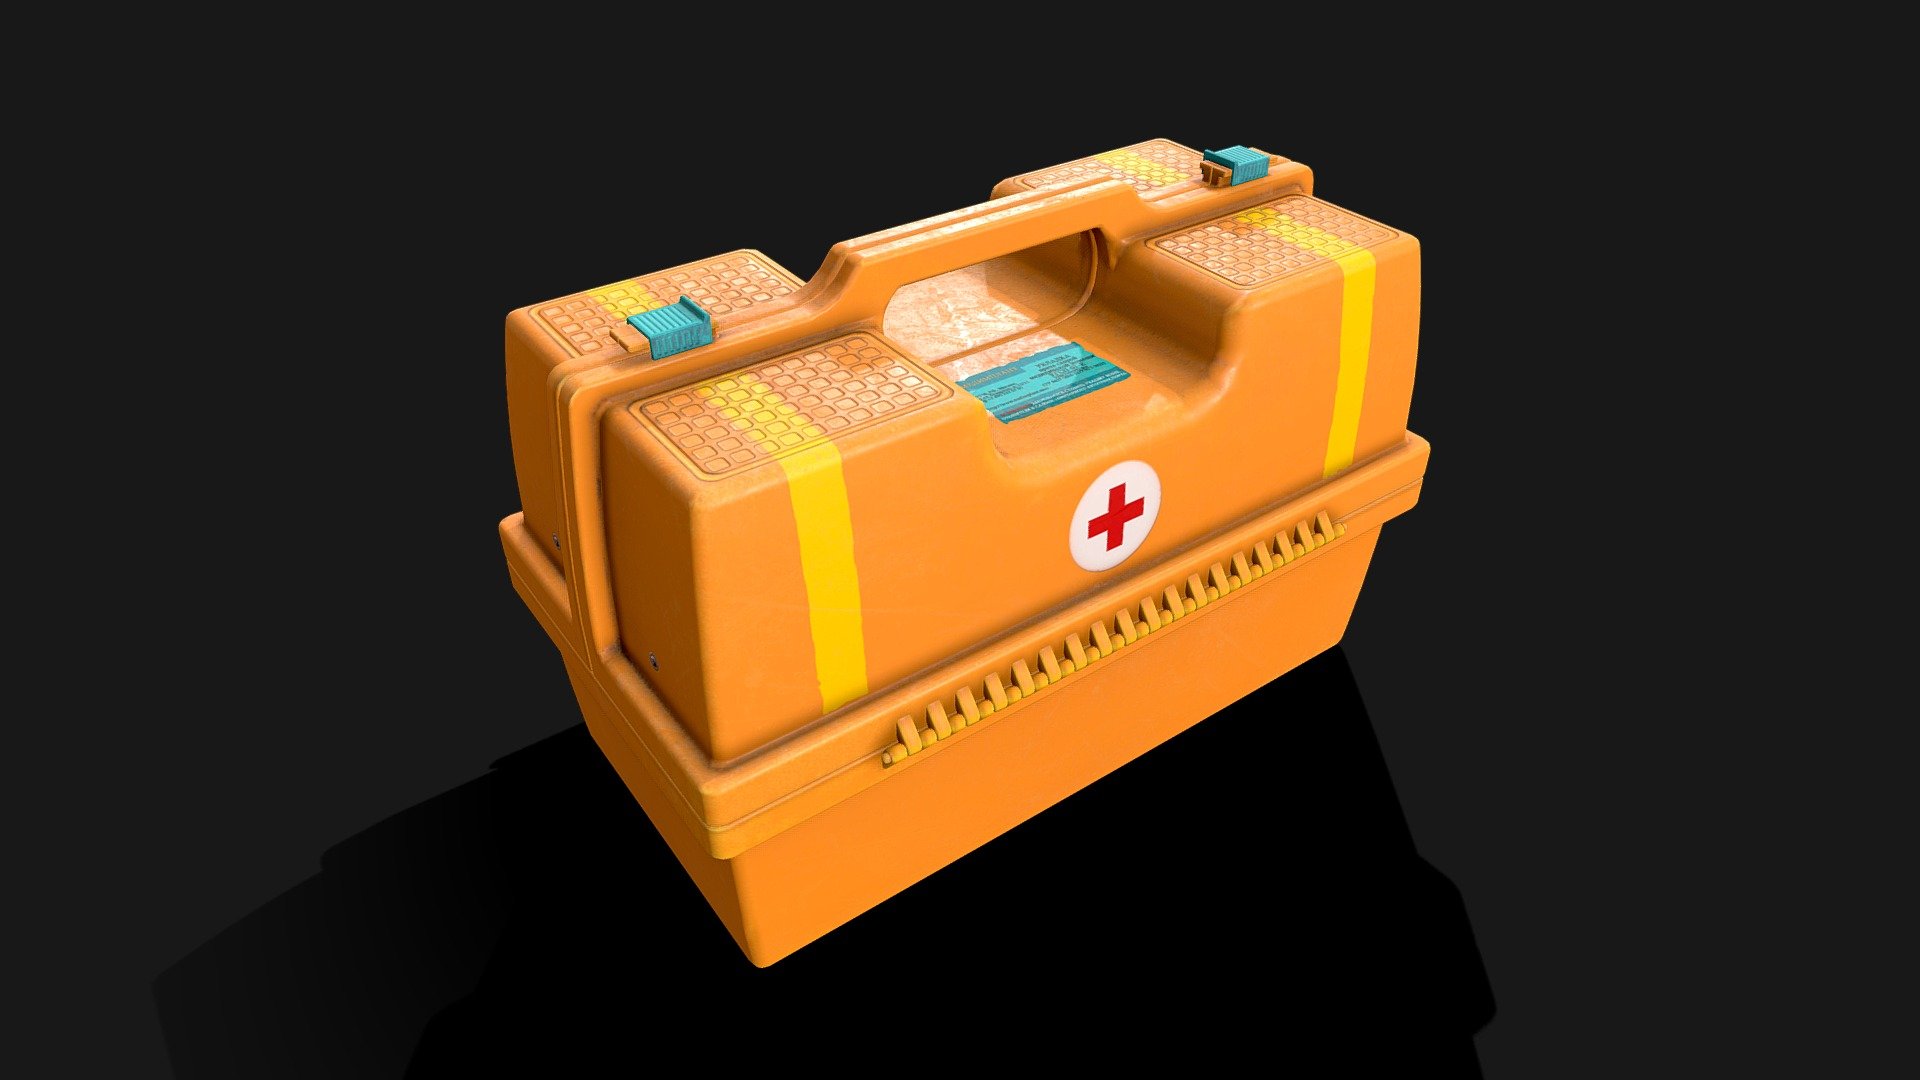 This is one of the cheap medical kits produced mainly from plastic in Russia, such kits are quite common among emergency services. The case is quite recognizable, but is not an exact replica 3d model